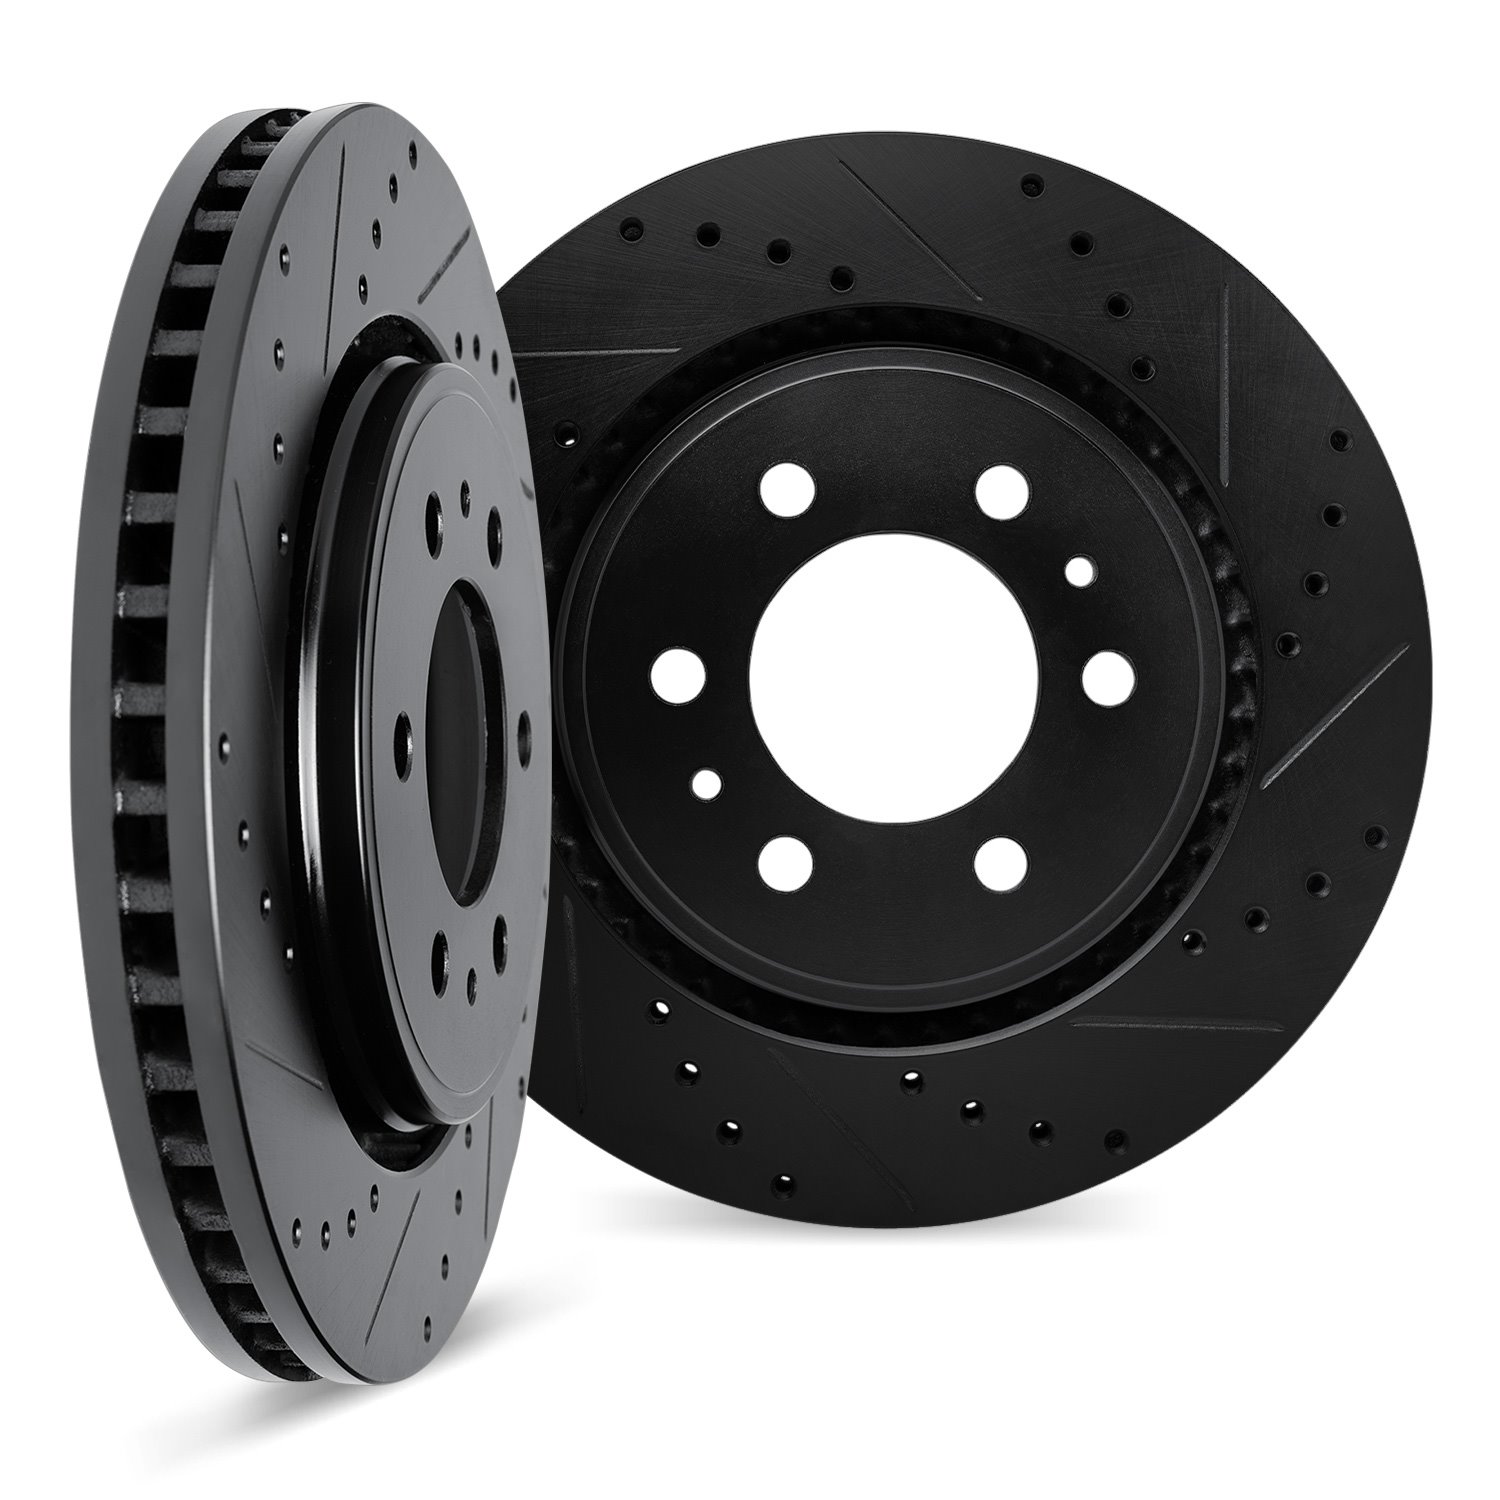 8002-48053 Drilled/Slotted Brake Rotors [Black], Fits Select GM, Position: Rear